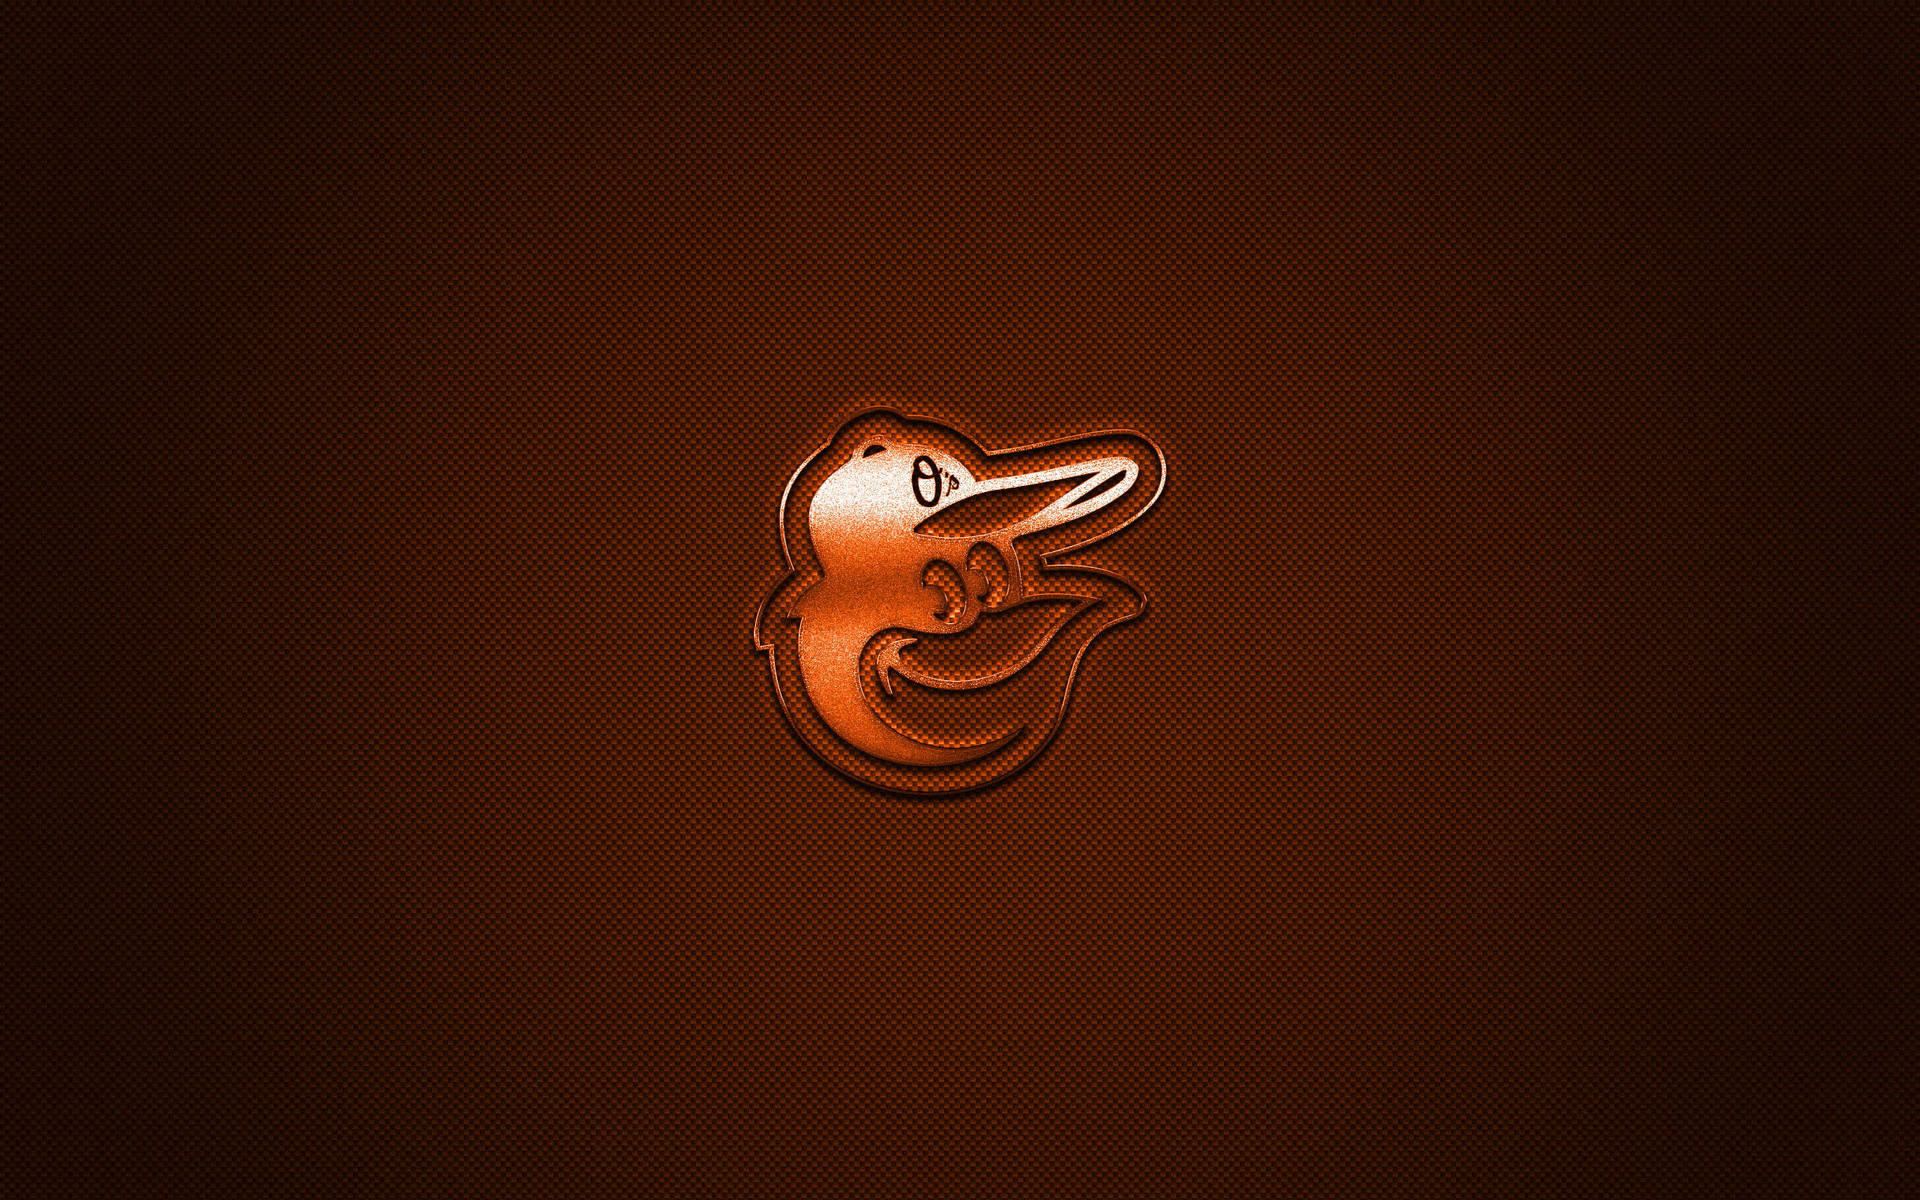 100+] Baltimore Orioles Wallpapers